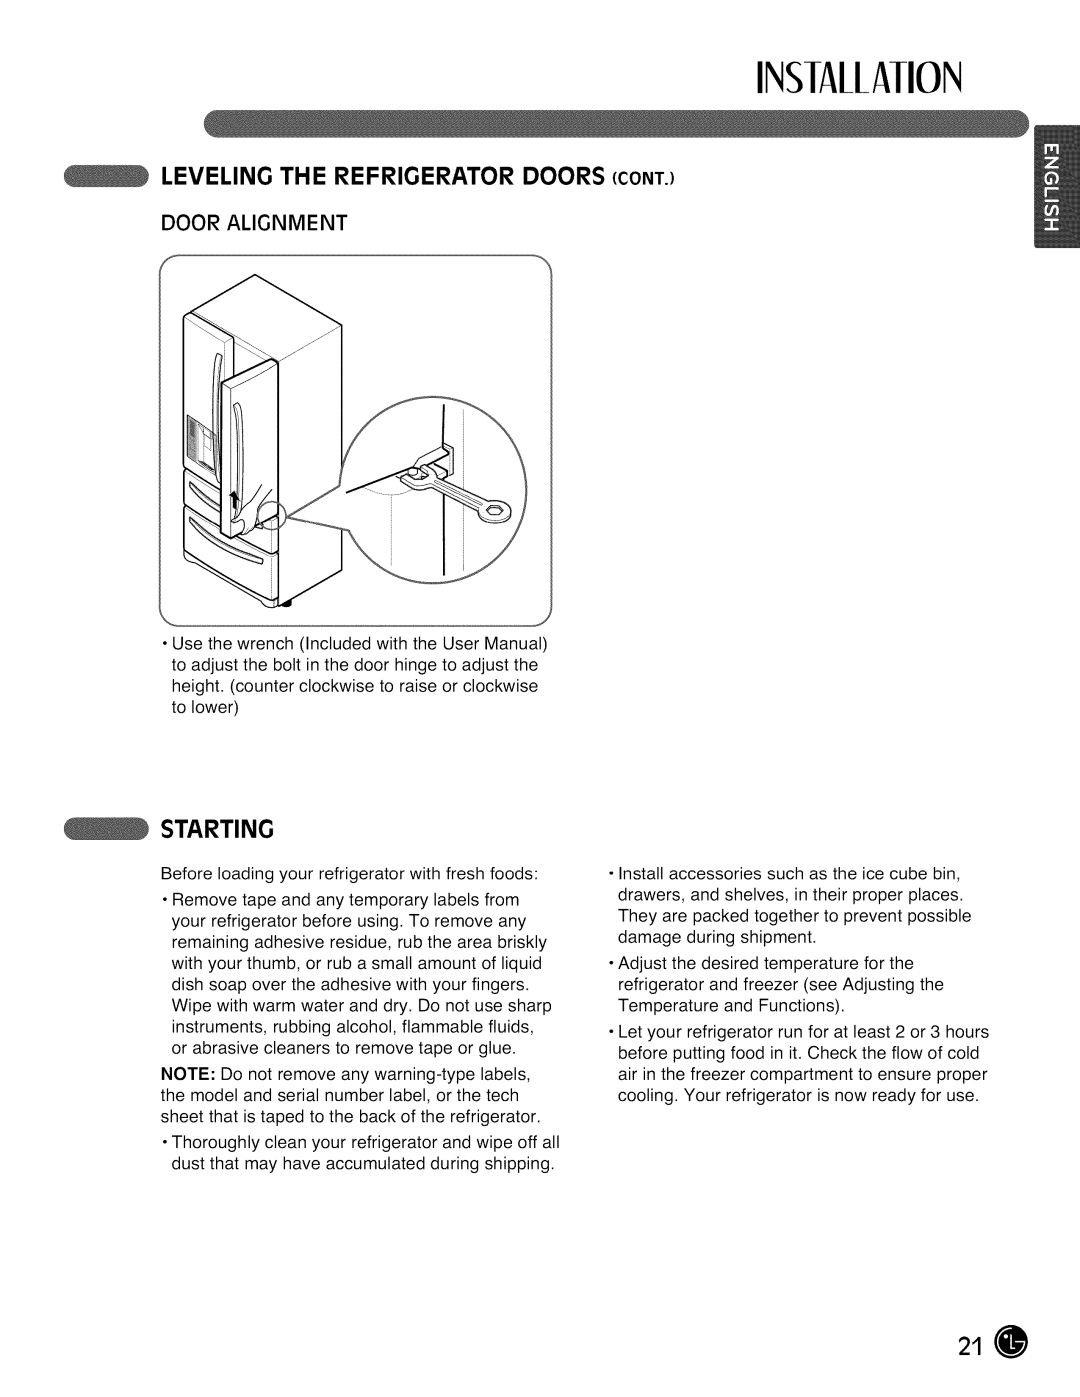 LG Electronics LMX28988 manual Leveling The Refrigerator Doors Cont, Starting, Door Alignment, INSIAllAIION 